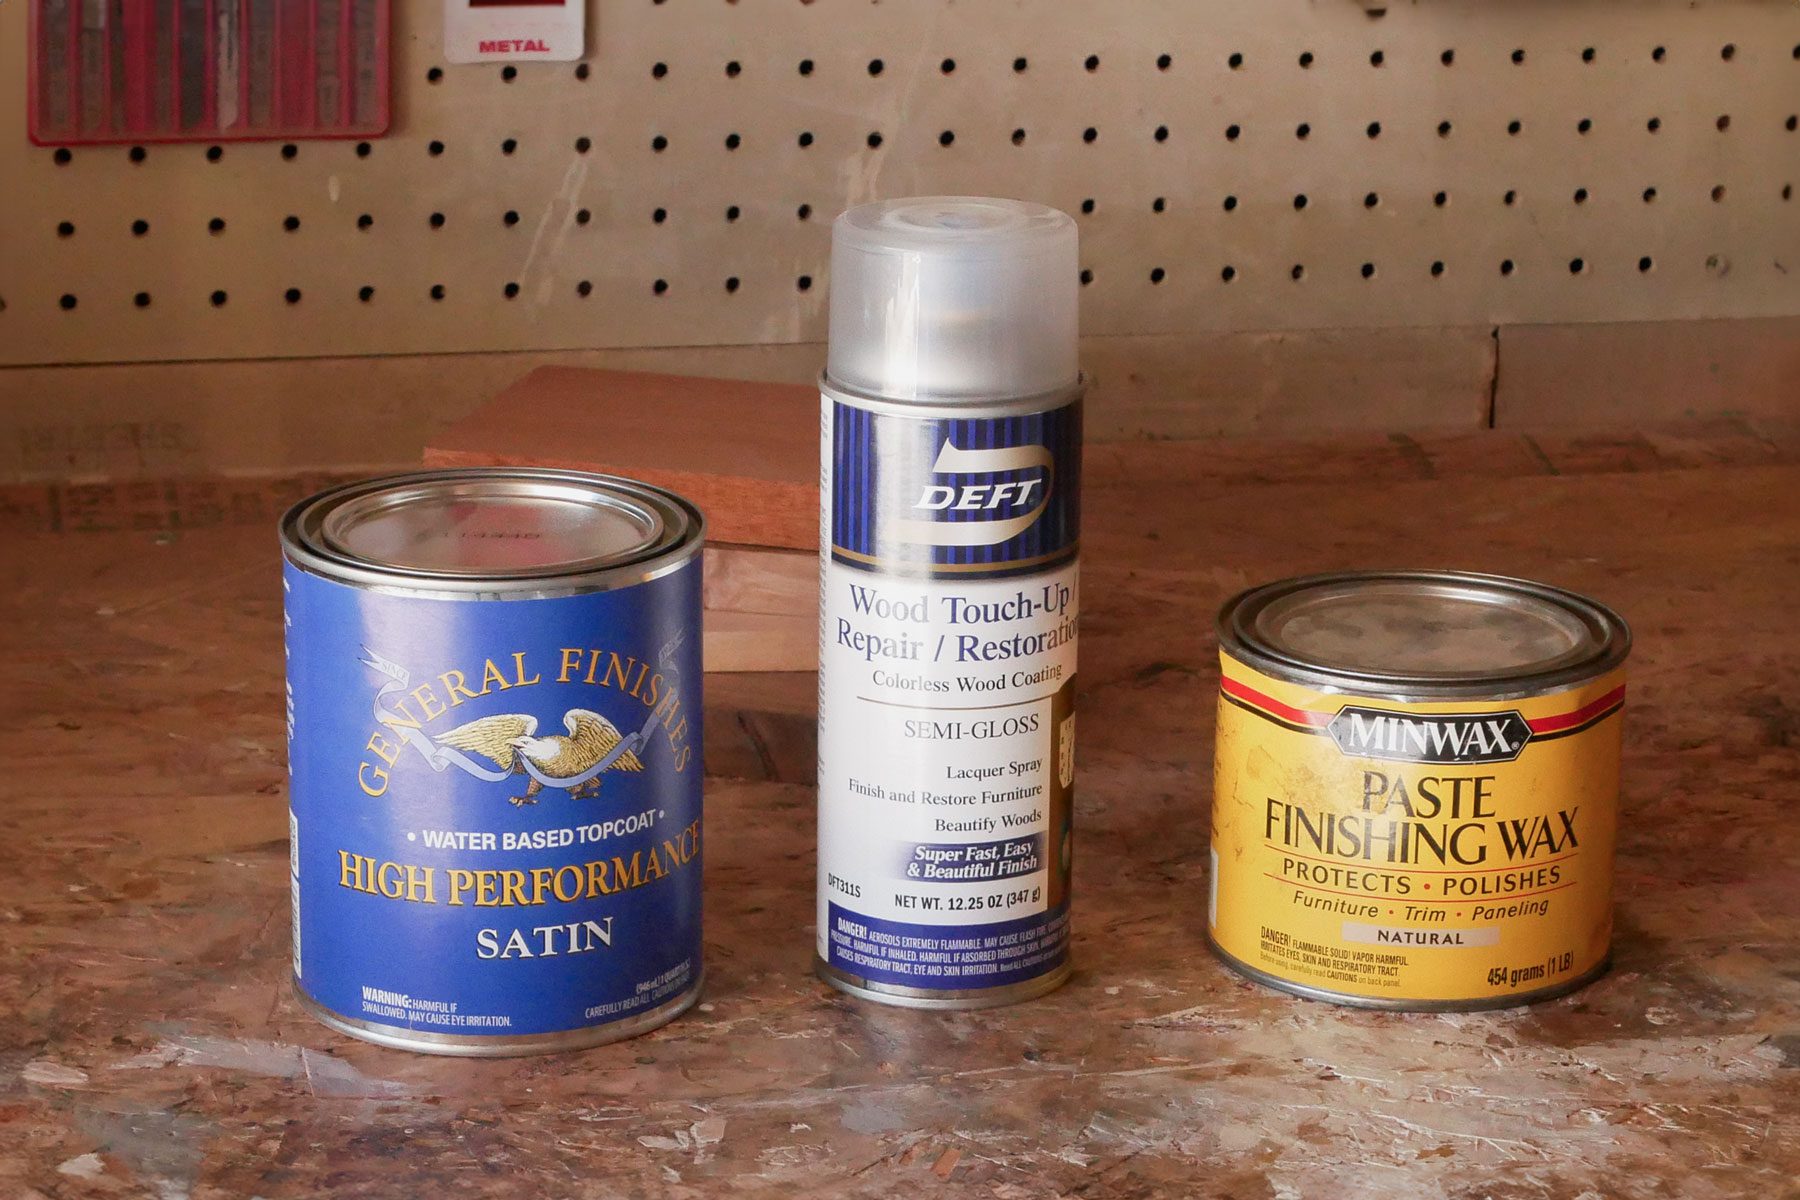 Three Topcoat cans placed on a wooden surface